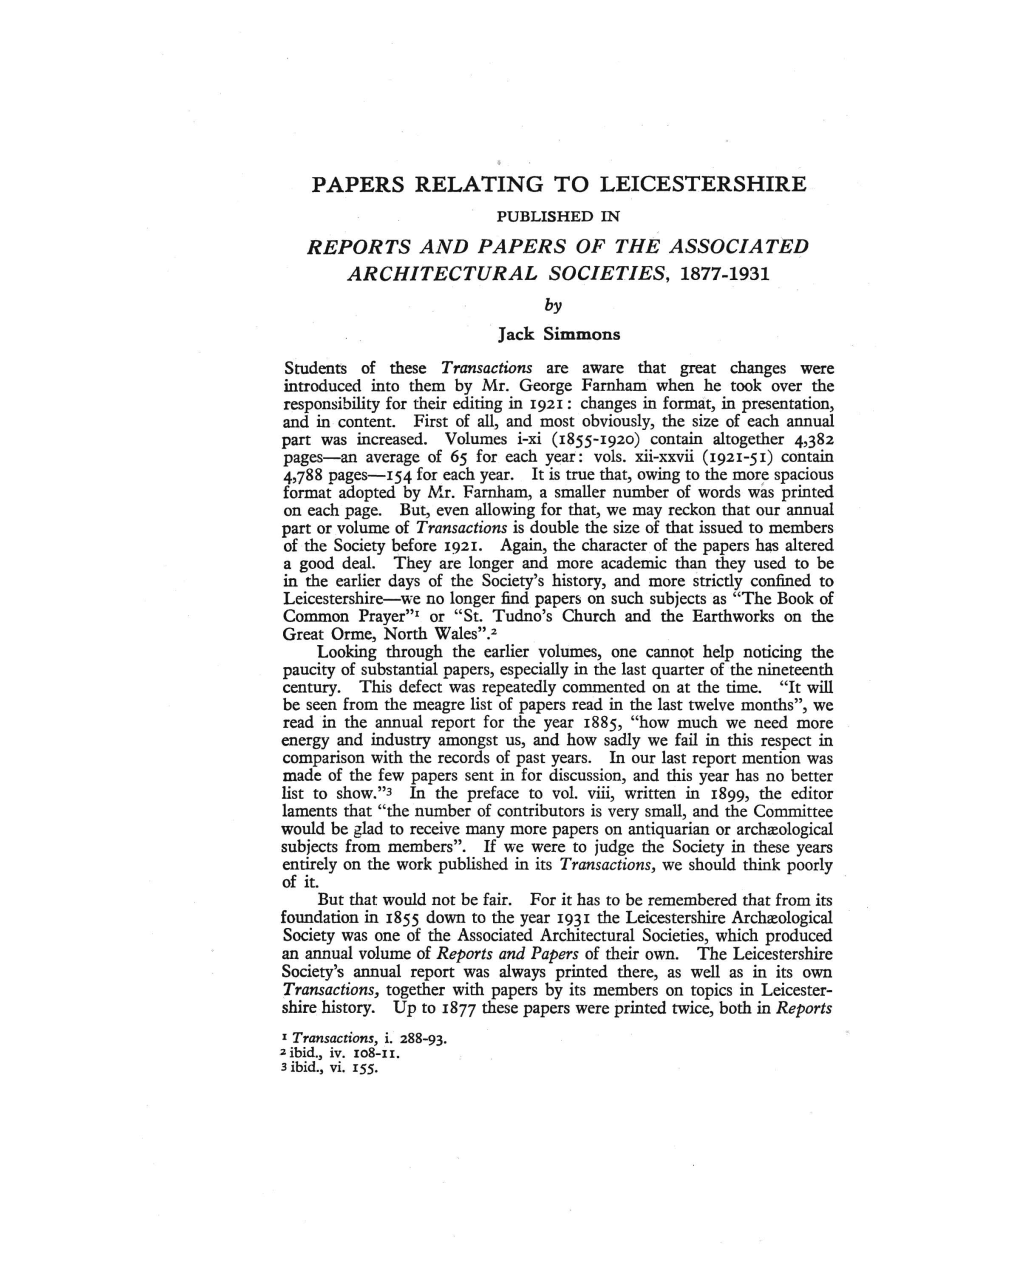 Papers Relating to Leicestershire